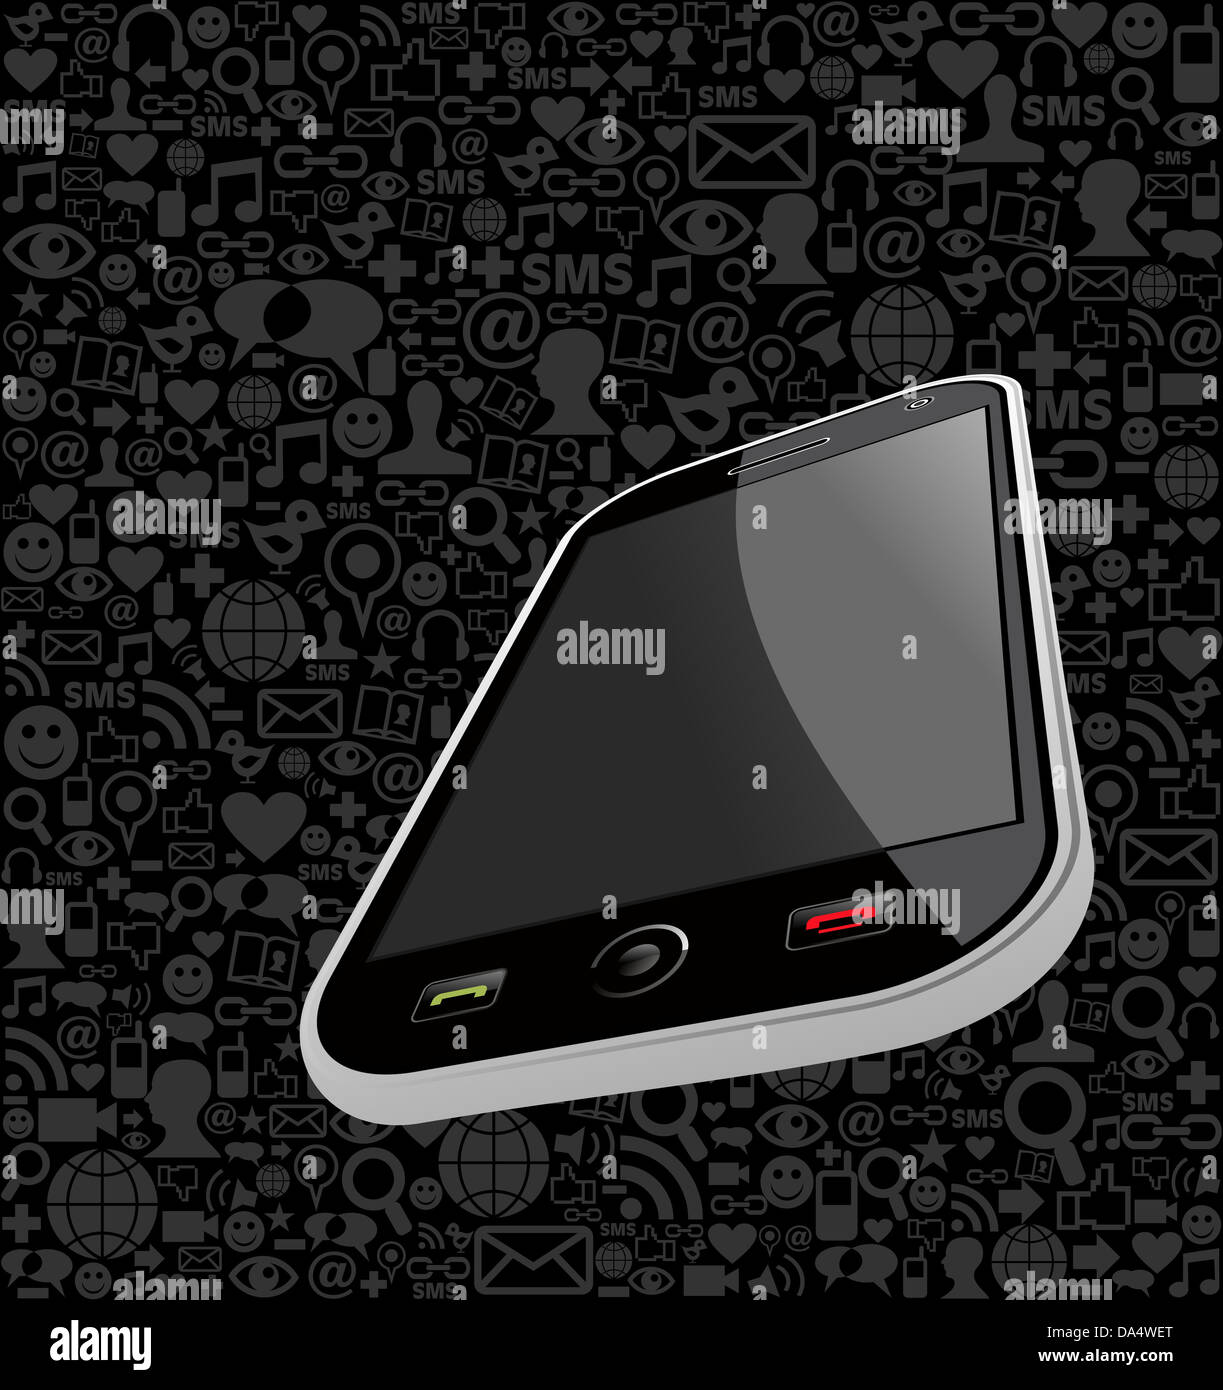 Smart phone generic on black icons background. Vector file layered for easy manipulation and customisation. Stock Photo